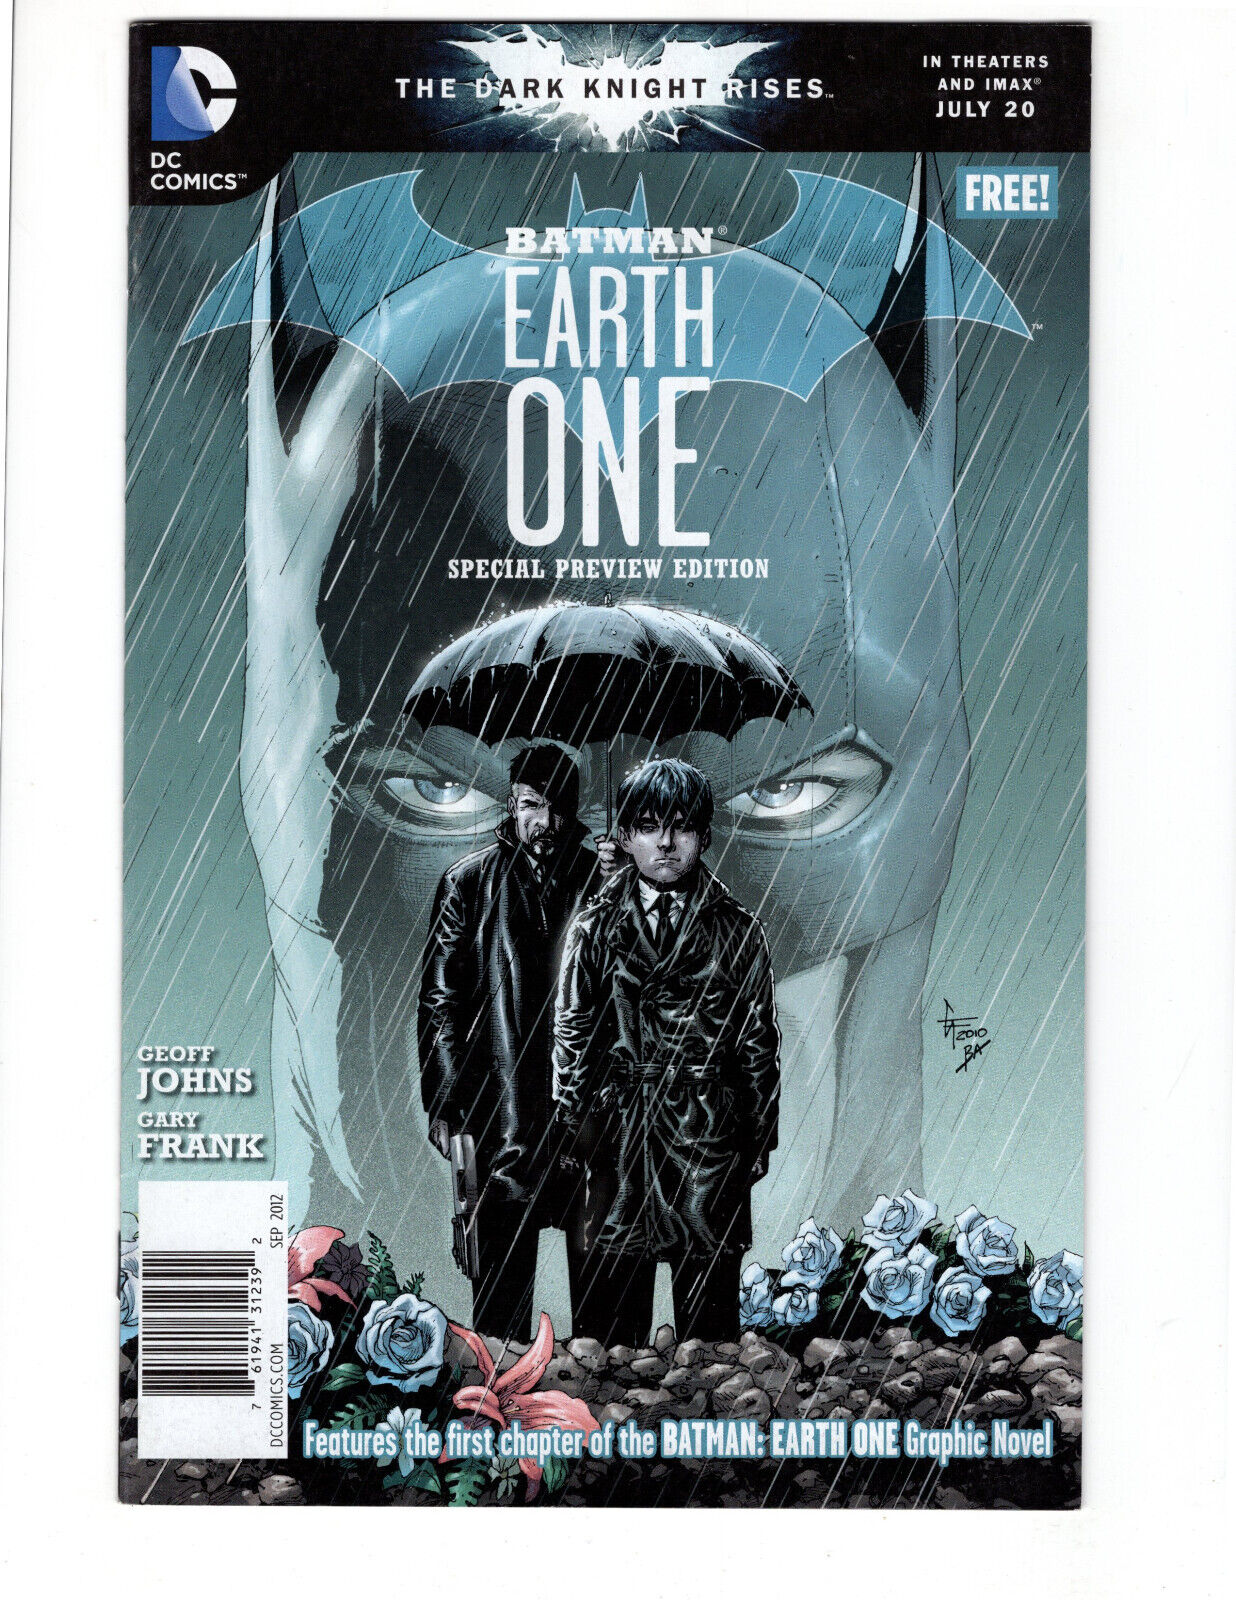 Batman Earth One Special Preview Edition (DC Comics 2012)- VF/NM